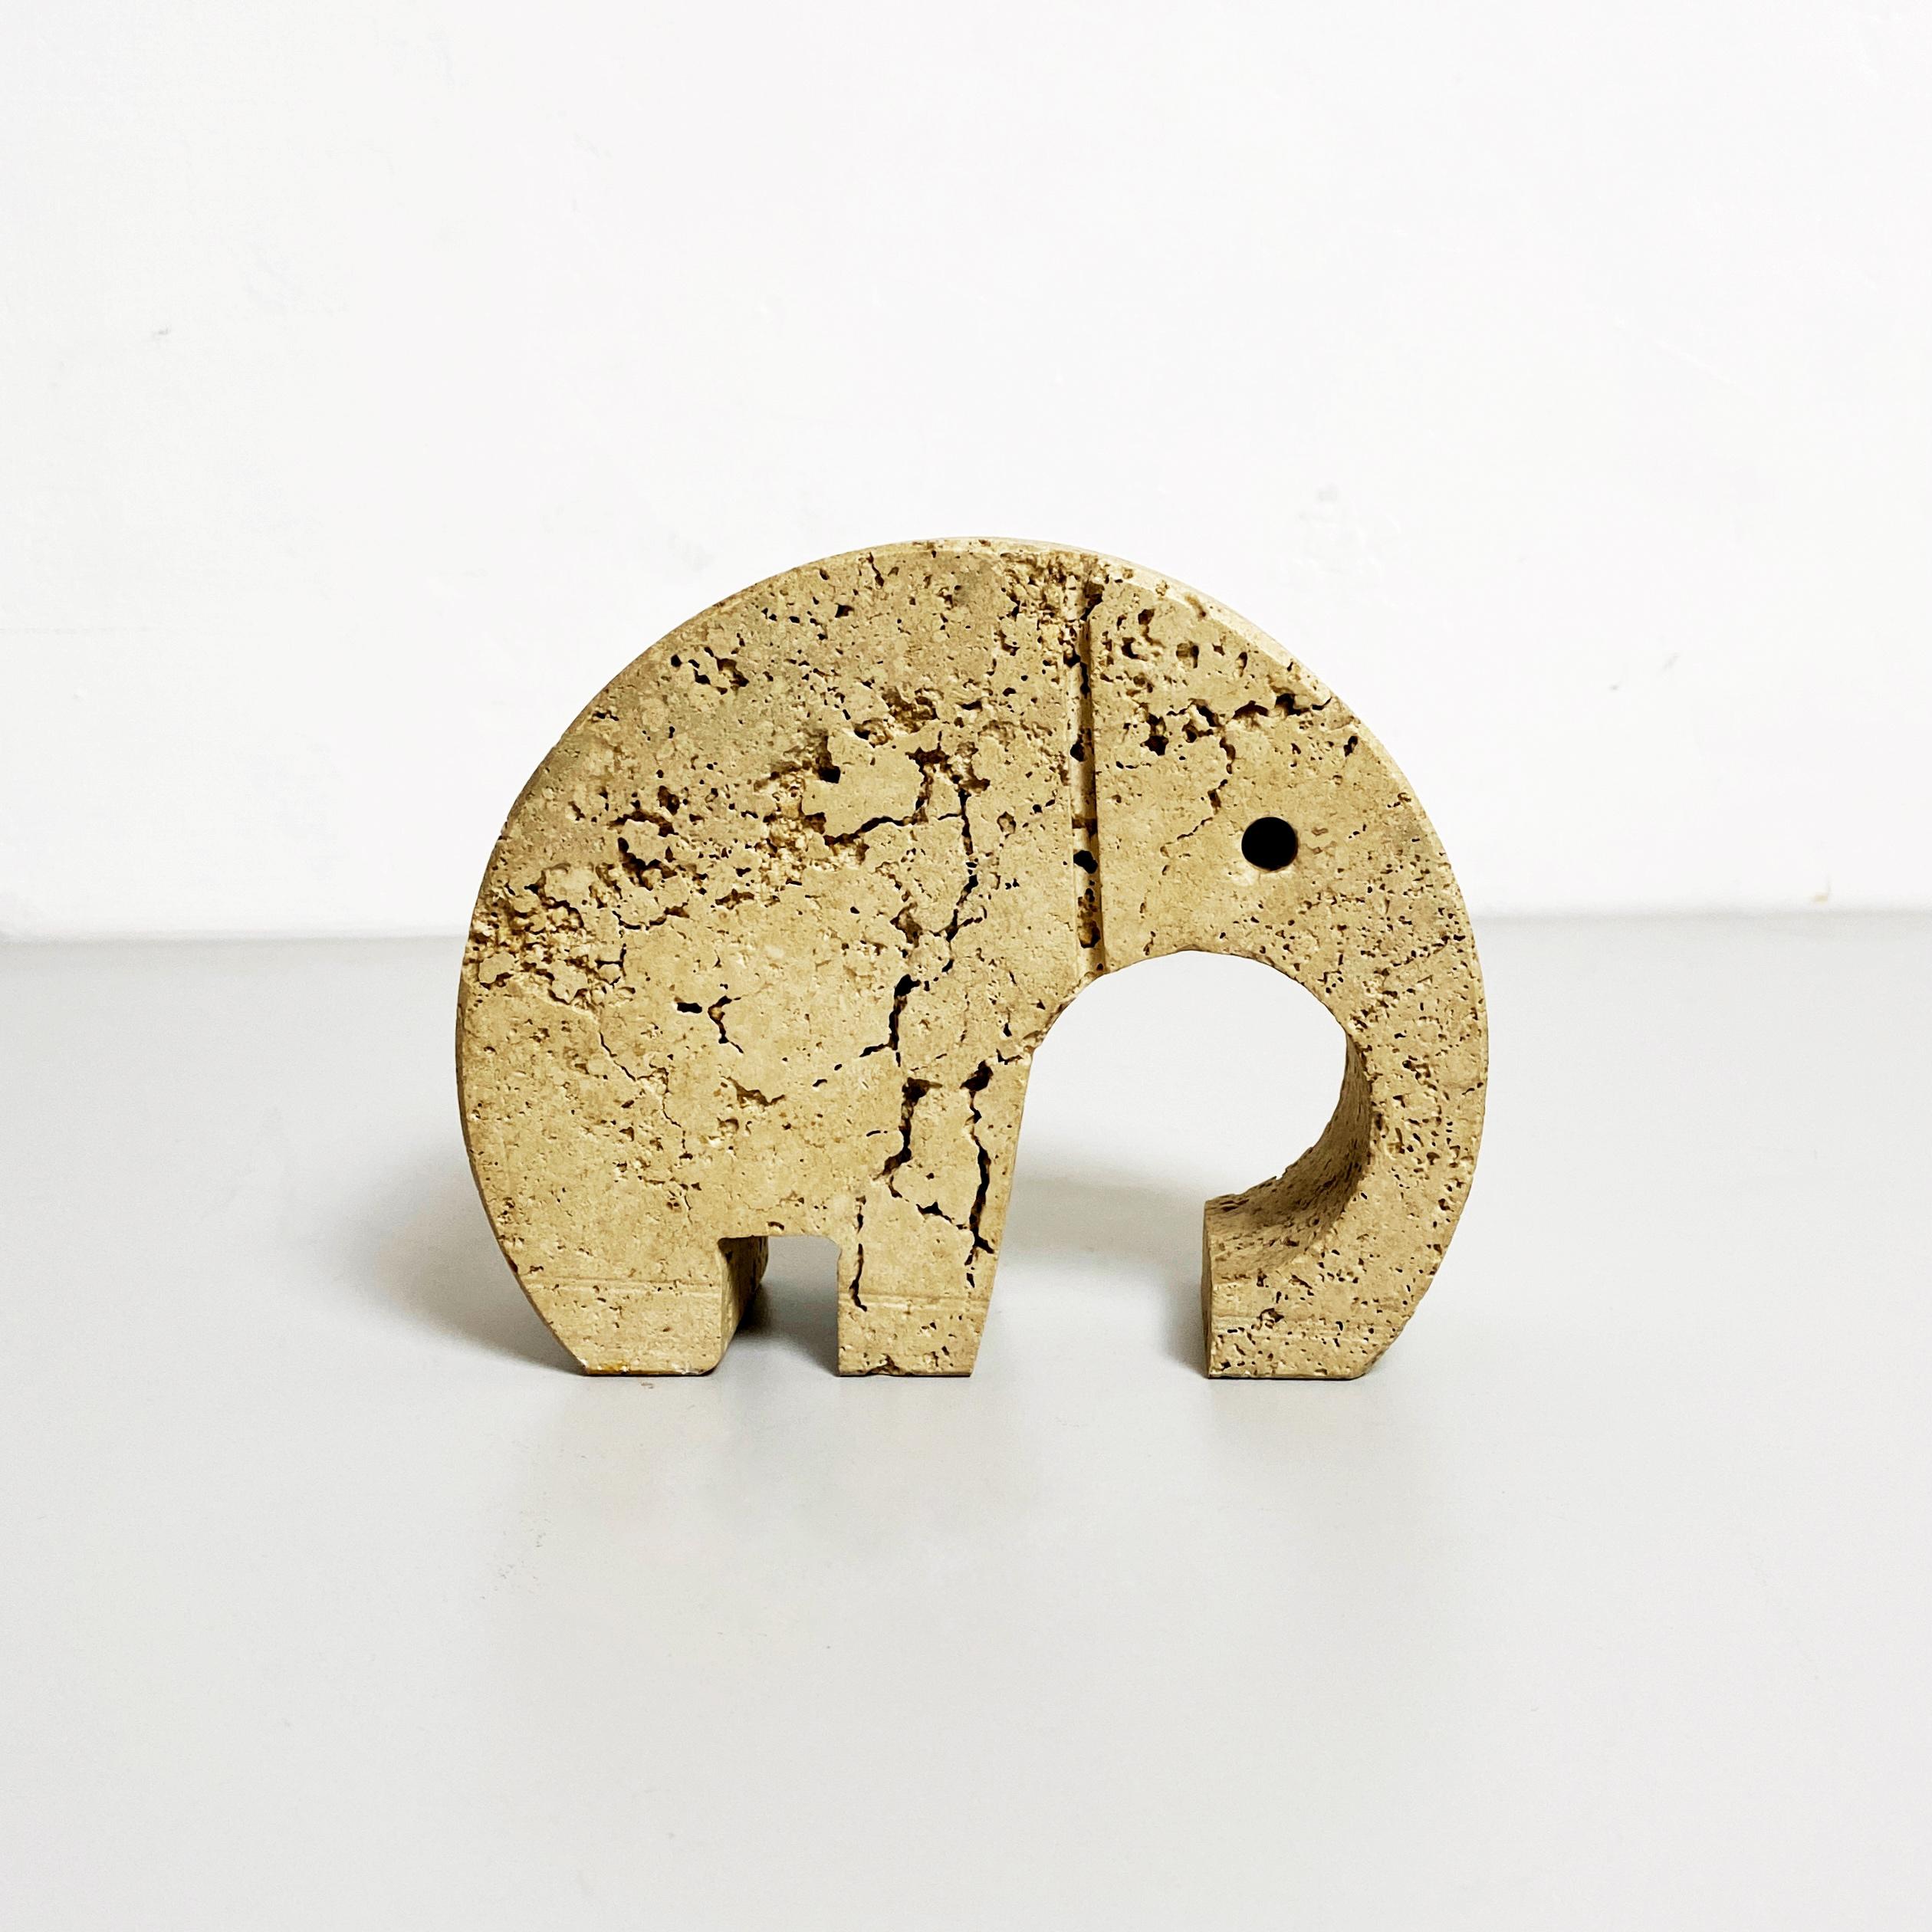 Travertine Elephant sculpture by Mannelli brothers, 1960s
Elephant in Rapolano travertin designed by the Mannelli brothers.

1960s

Very good condition.

Measures in cm 16x5x13 H.